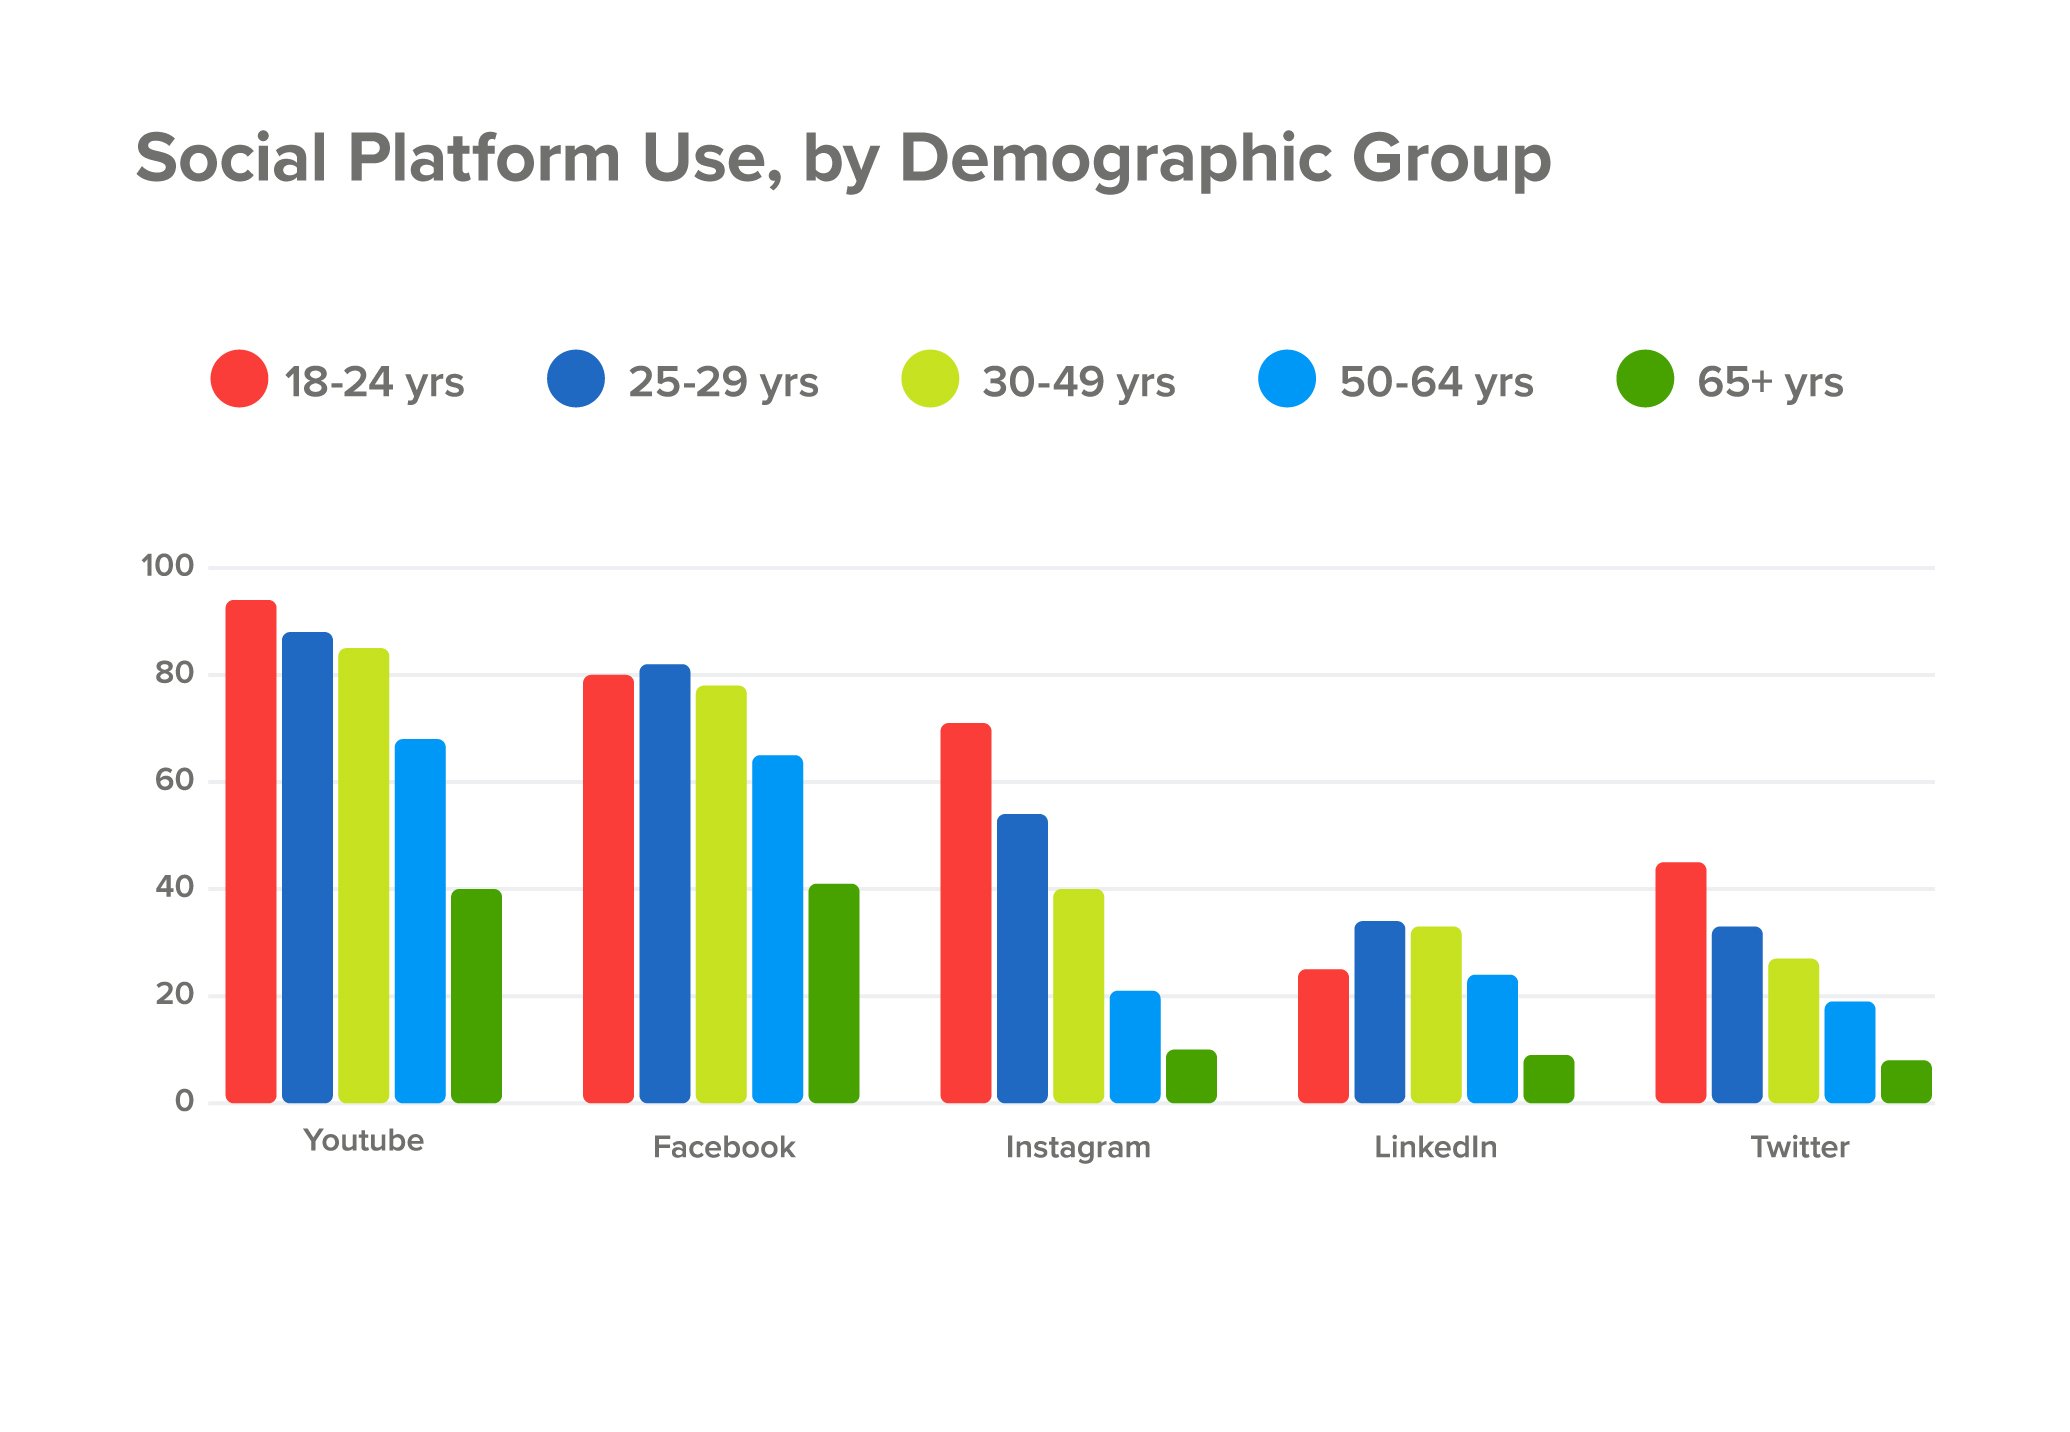 oSocial media usage, by demographic group